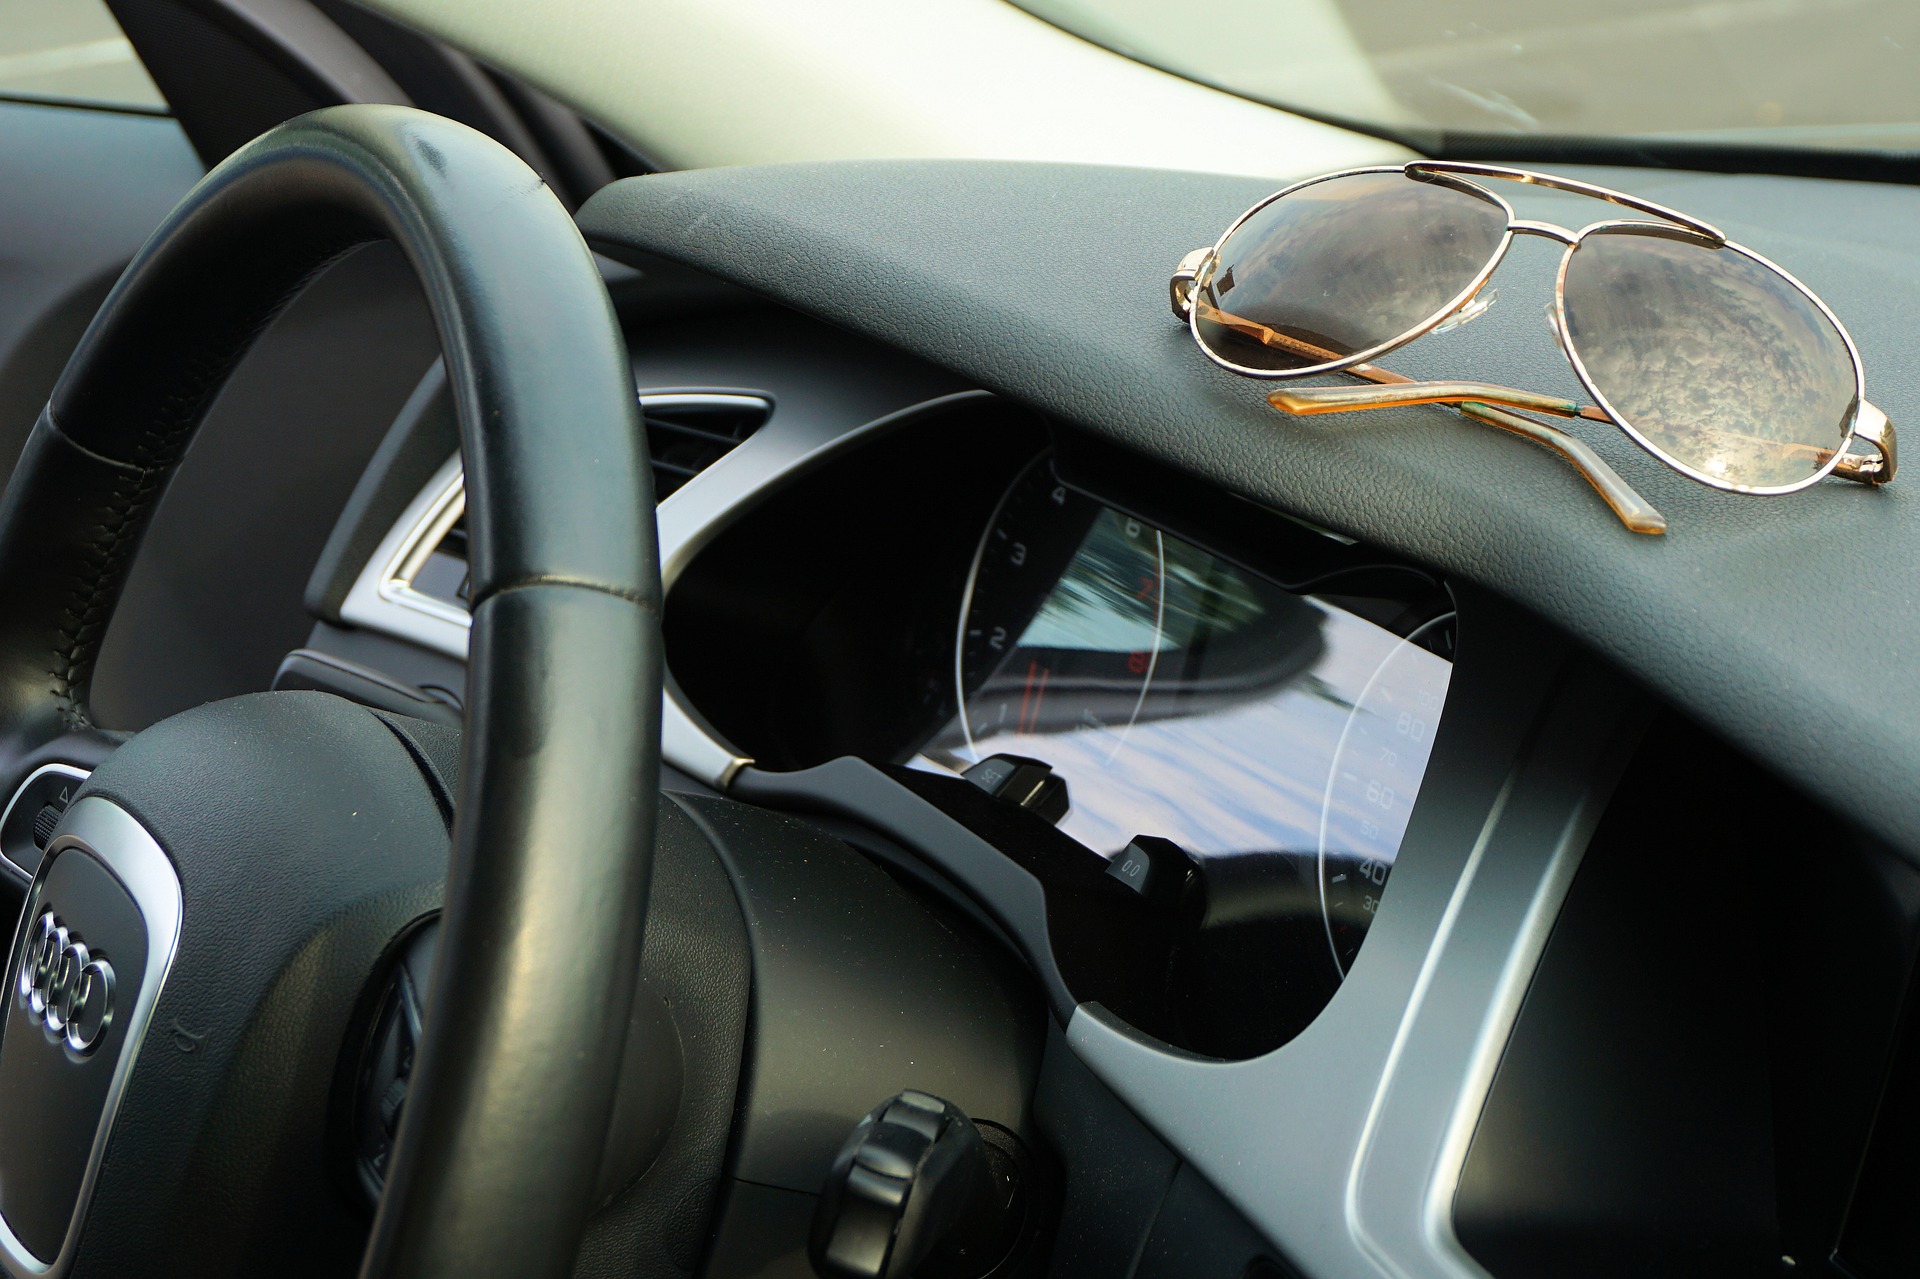 Wearing sunglasses while driving - How you can land a fine of up to £2,500